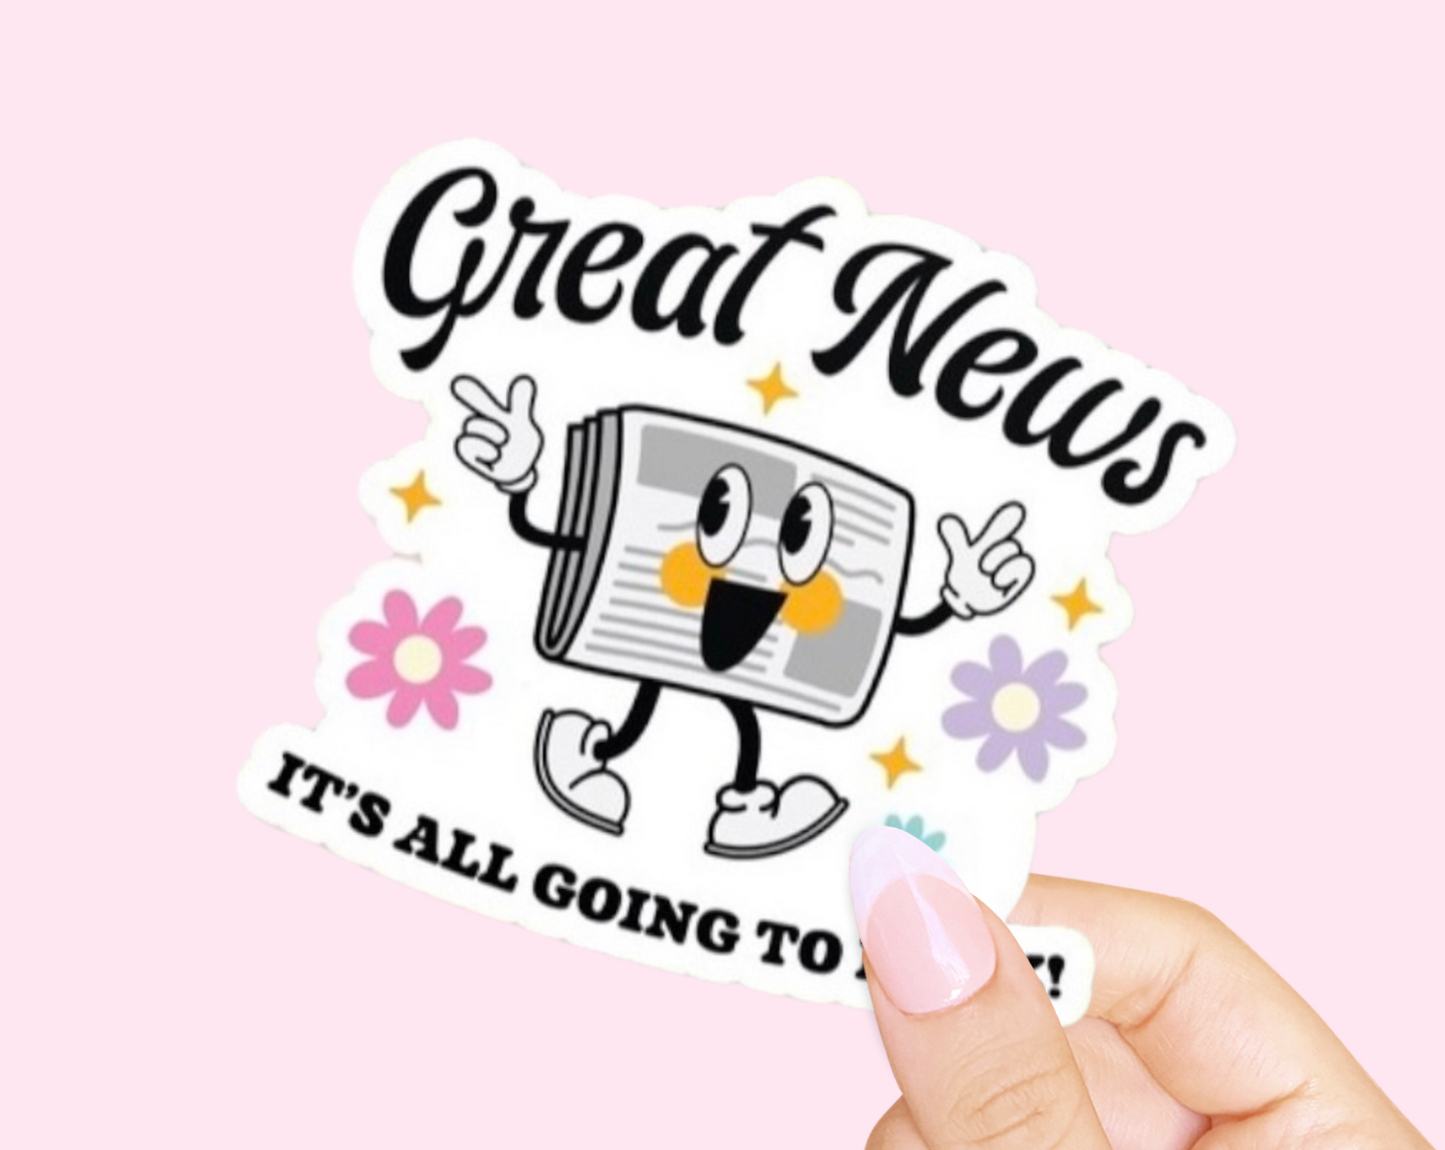 It’s All Going To Be Okay News Sticker